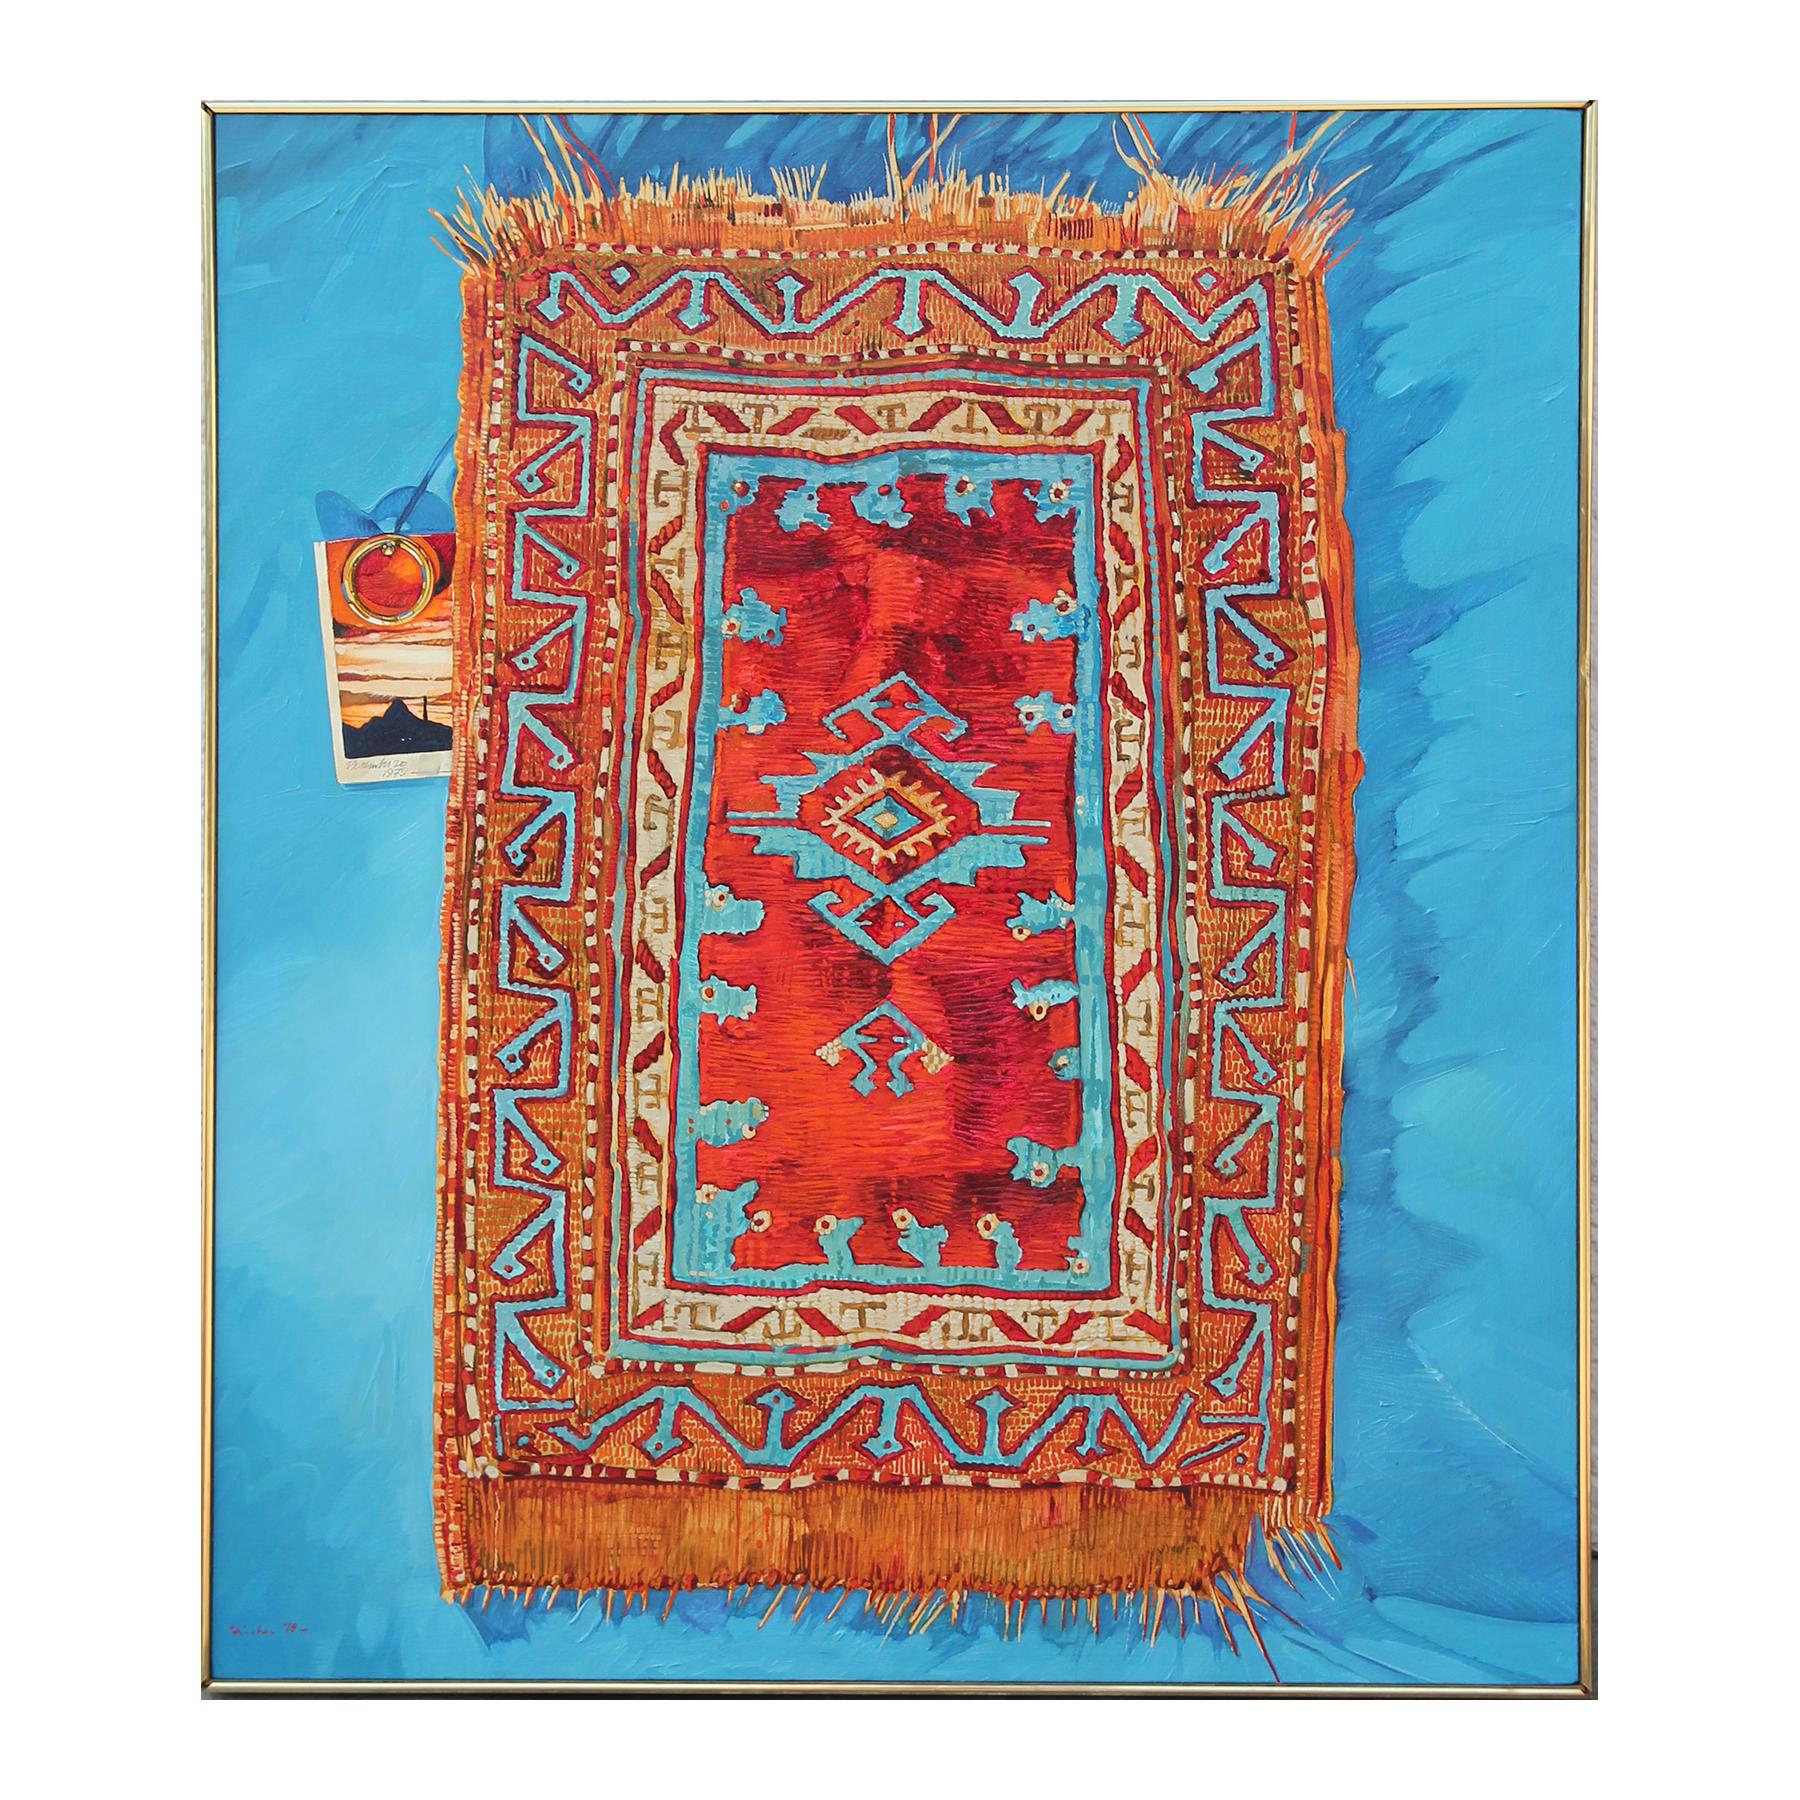 John Fincher Abstract Painting - “Rug With Ring” Abstract Realist Blue and Orange Patterned Textile Still Life 